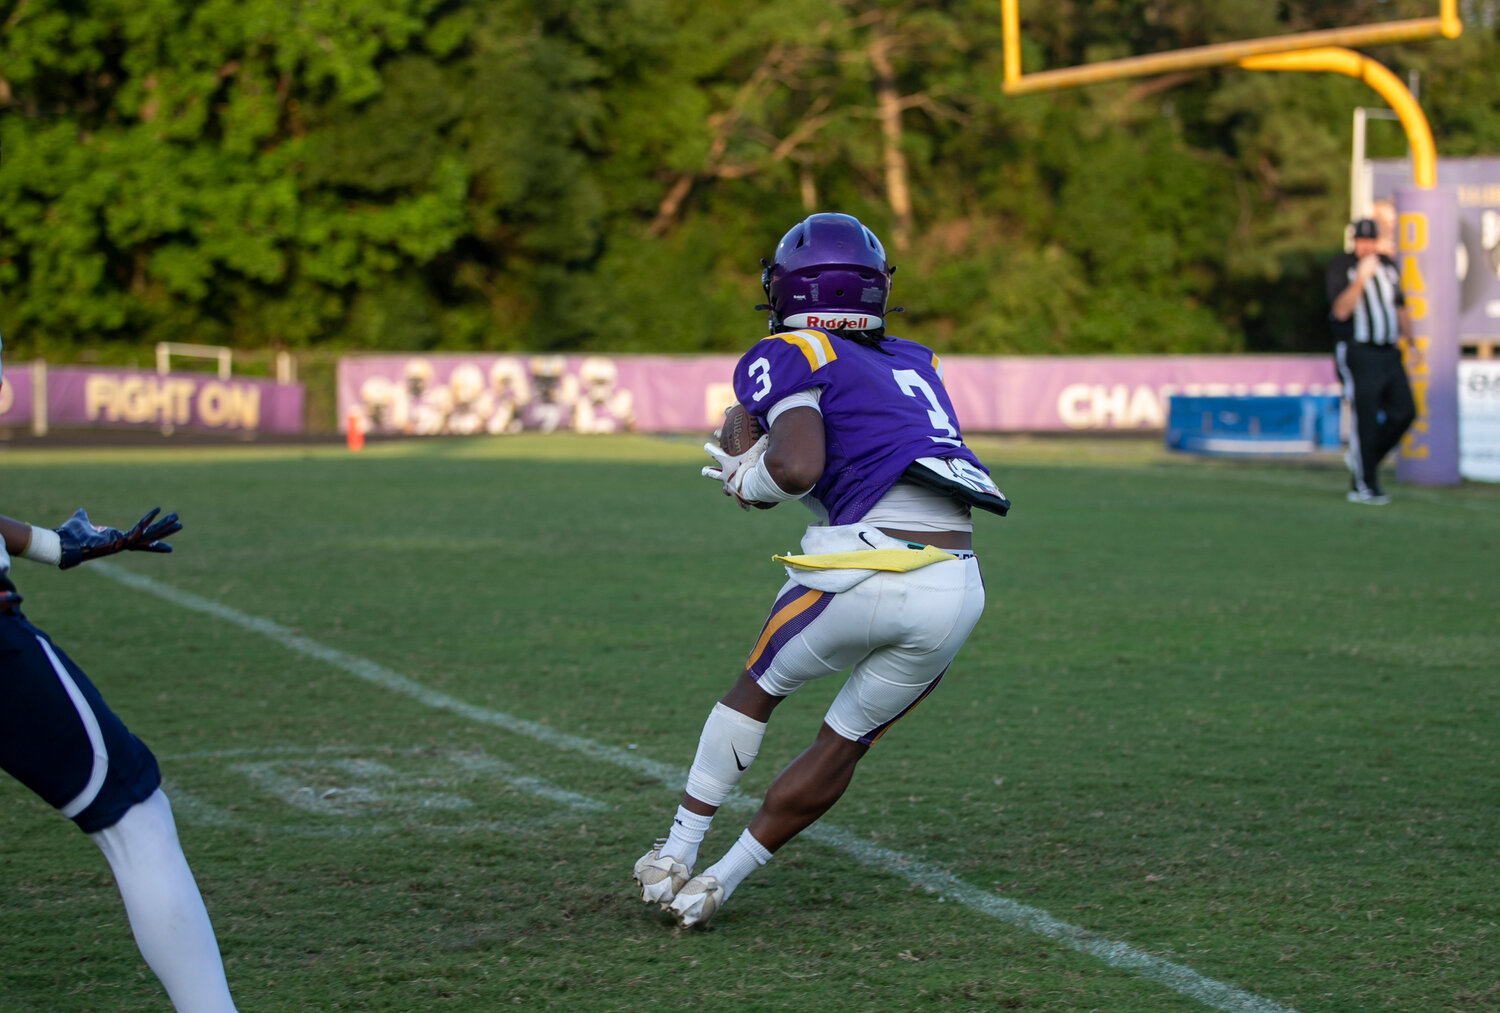 RJ Dailey falls into the end zone with a 23-yard touchdown reception in the second quarter of the exhibition game between Daphne and Foley at Jubilee Stadium Friday, May 19.